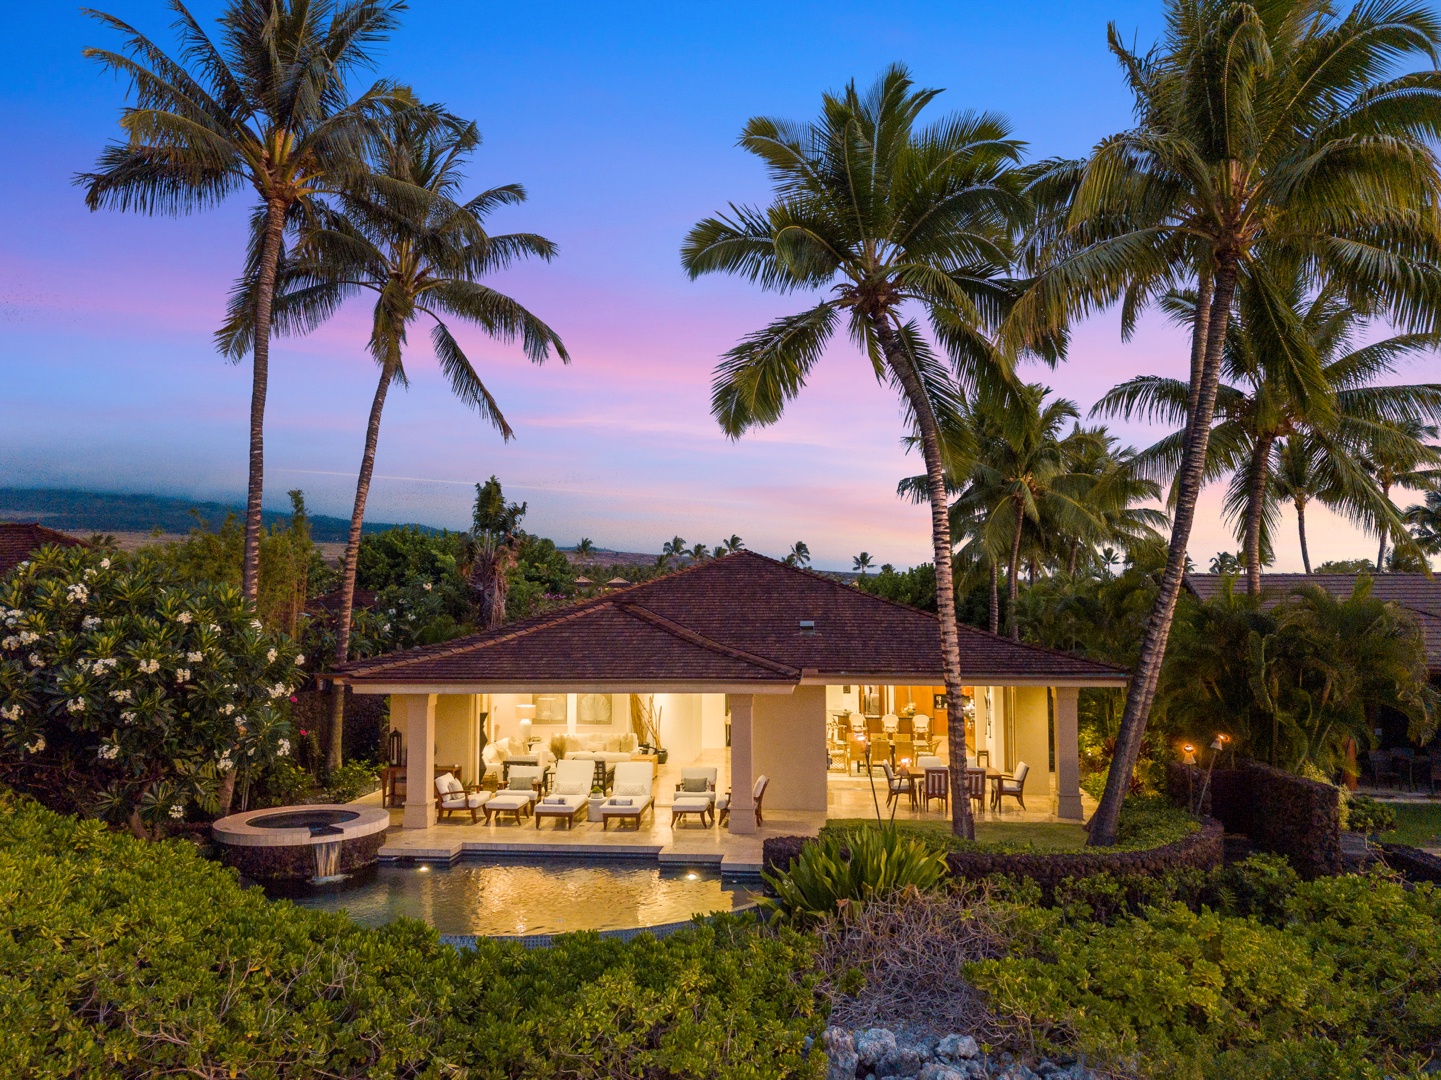 Kailua Kona Vacation Rentals, 4BD Pakui Street (147) Estate Home at Four Seasons Resort at Hualalai - Exquisite newly remodeled and redesigned estate home w/private pool & spa at twilight.